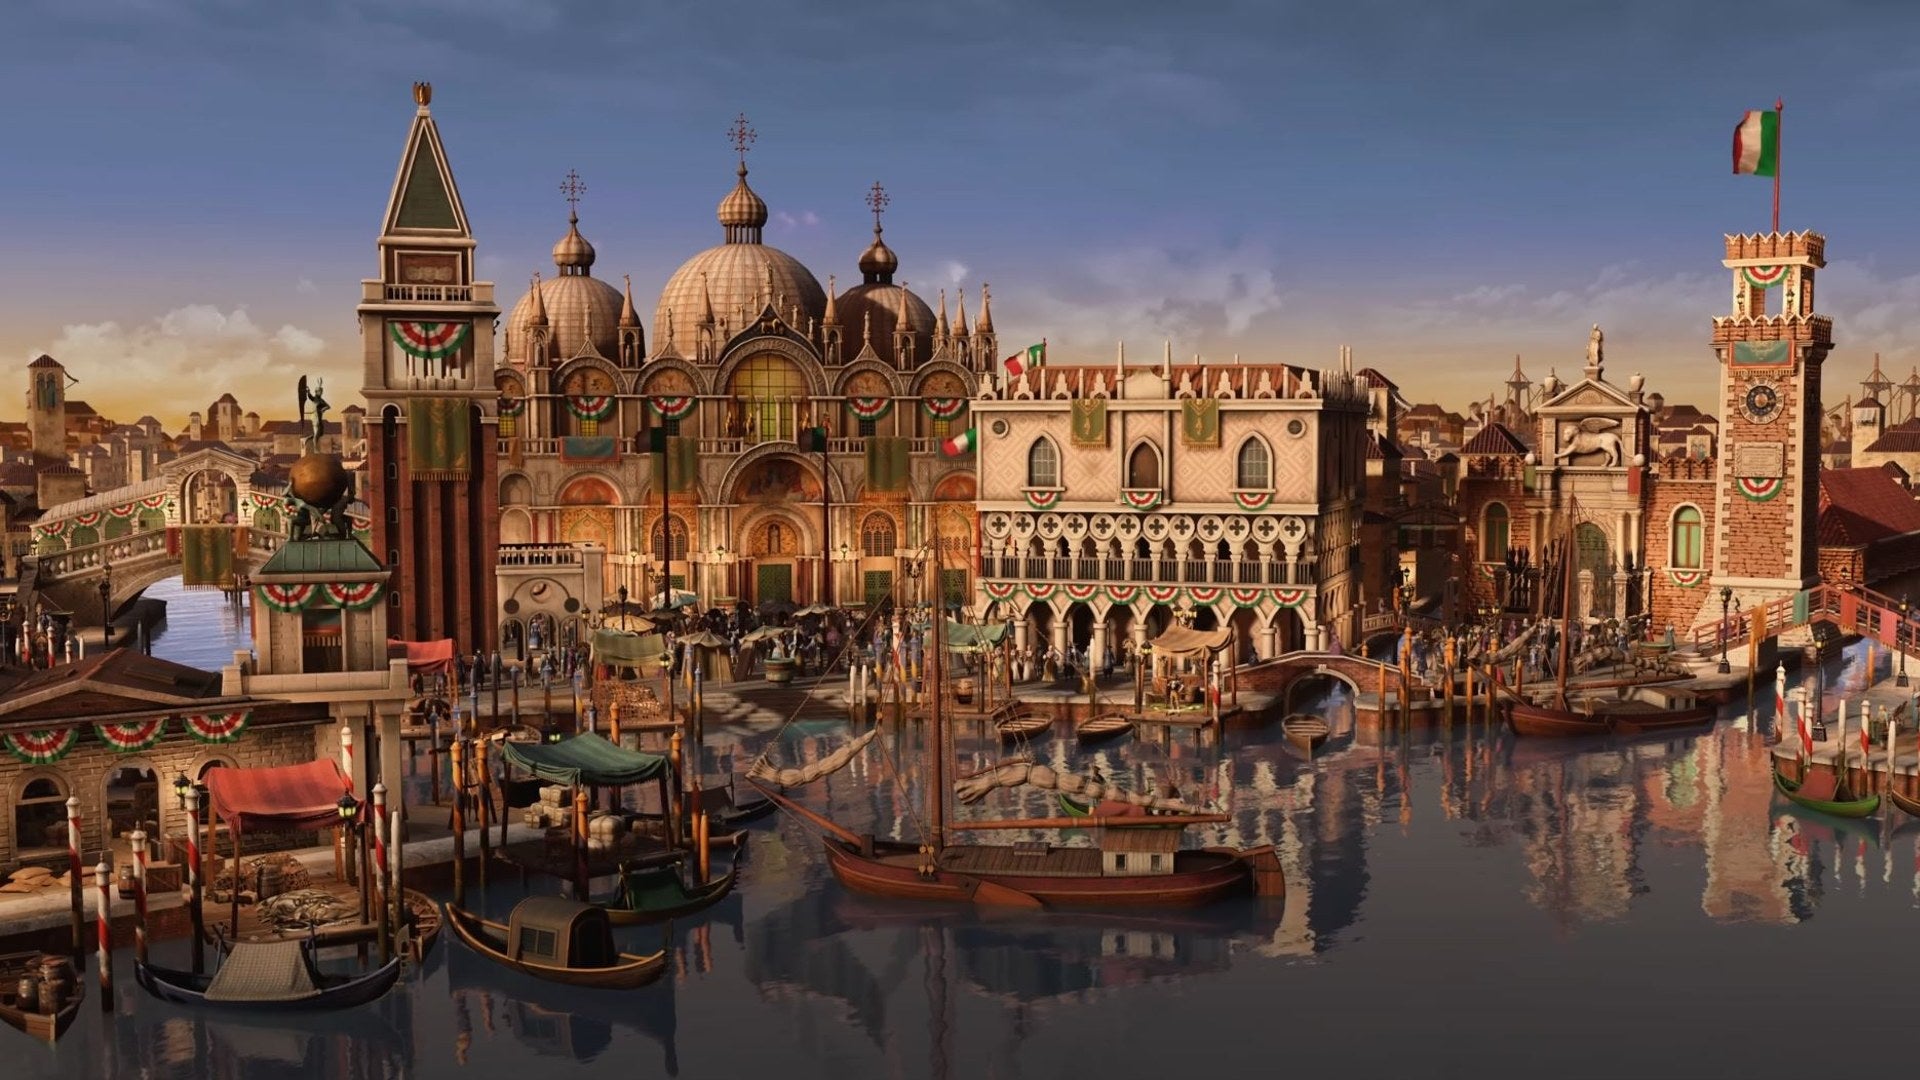 Age Of Empires 3: Definitive Edition's latest DLC pack The Knights Of The Mediterranean introduces the Italian civilisation